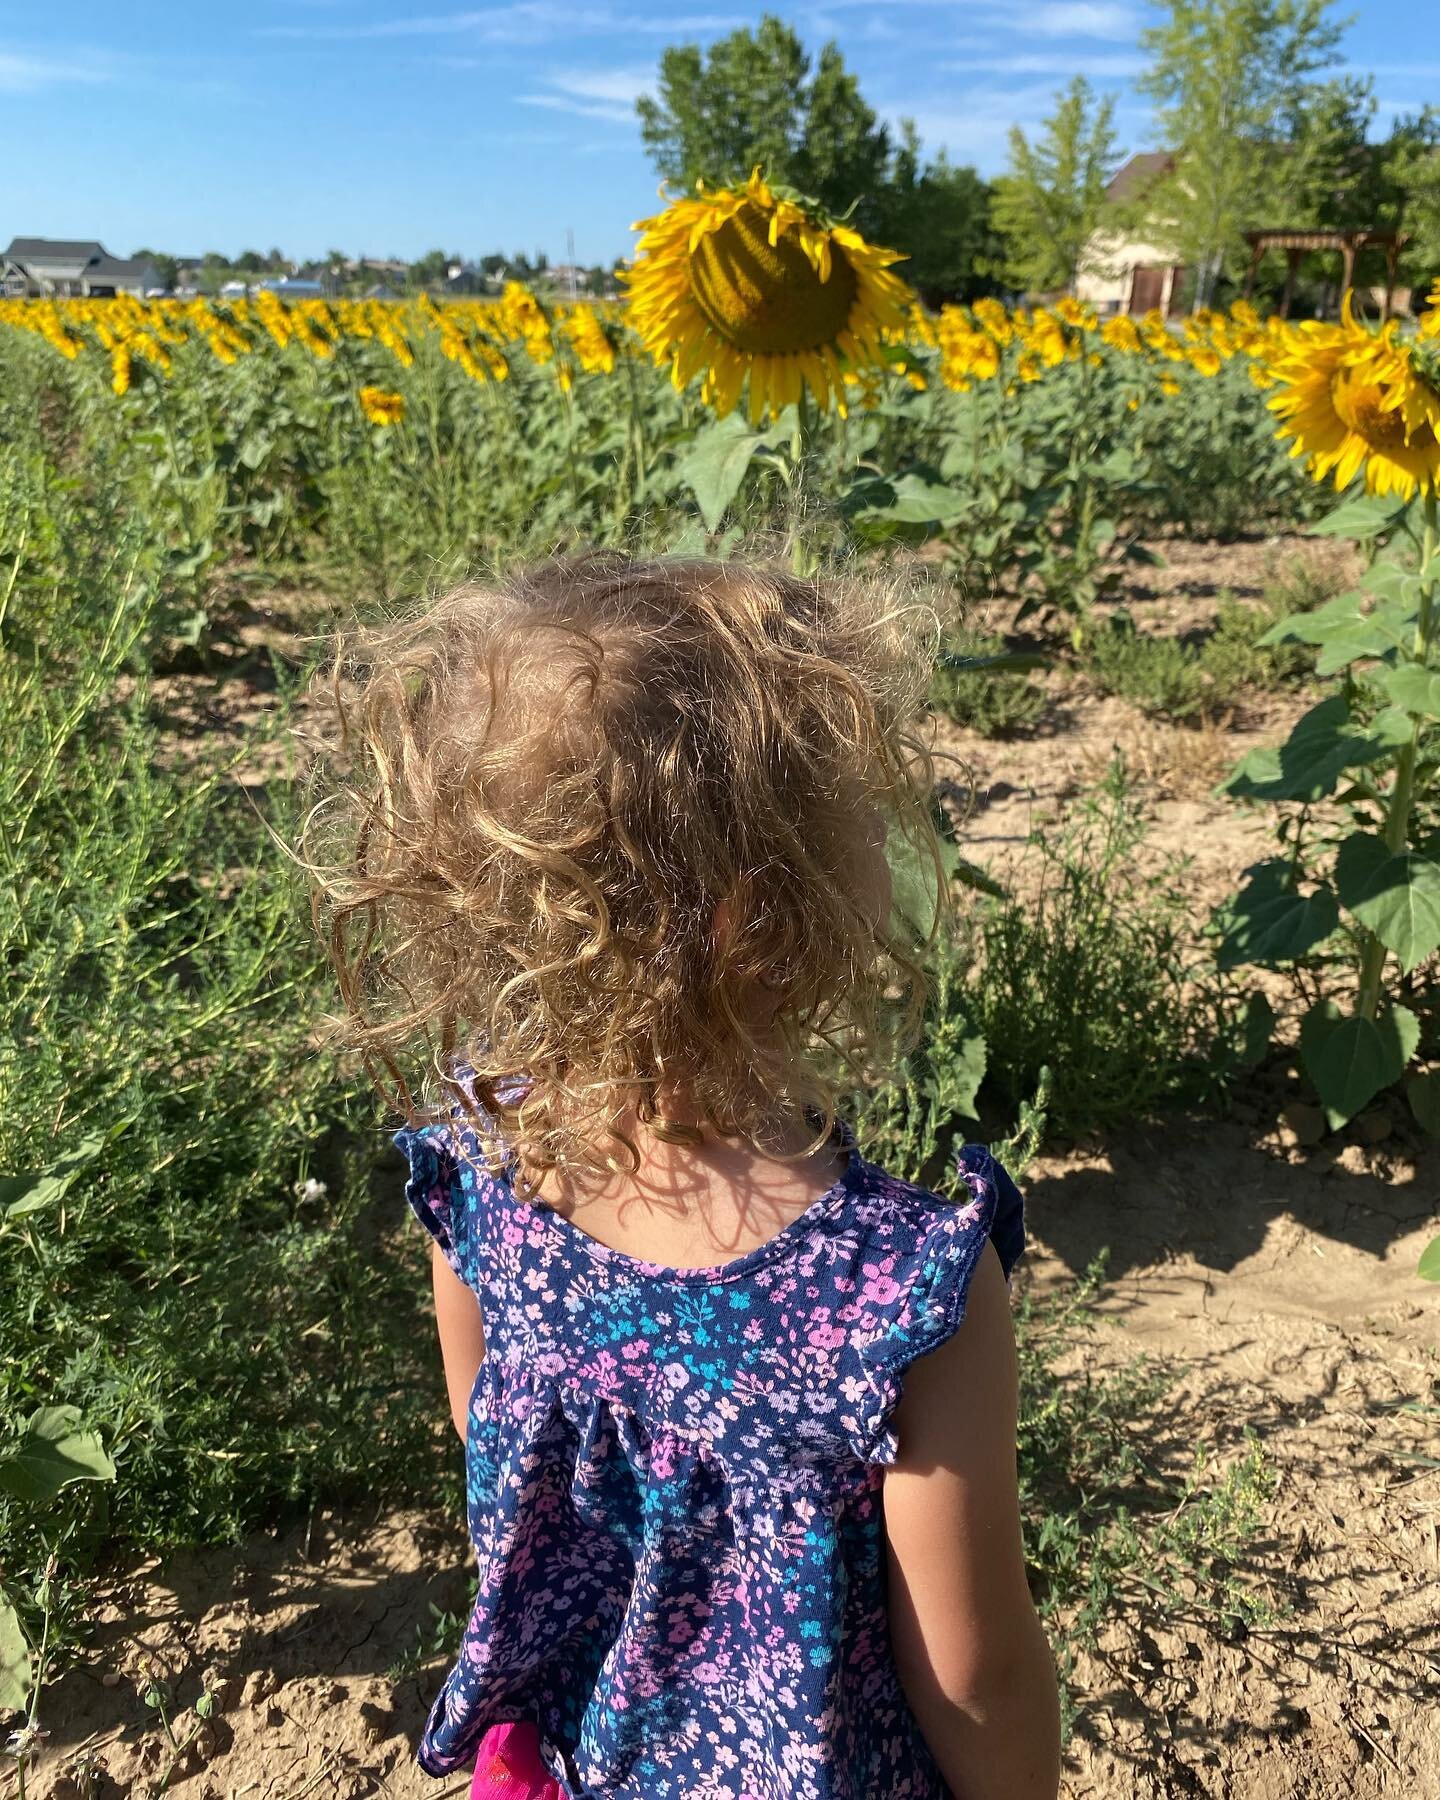 &ldquo;She&rsquo;s a sunflower- strong, bold, and true to herself.&rdquo;There is a random field of sunflowers on one of the roads we frequently drive (it is the road we take to Target 😂), and every time we drive by I am in awe of it. I feel a gravi